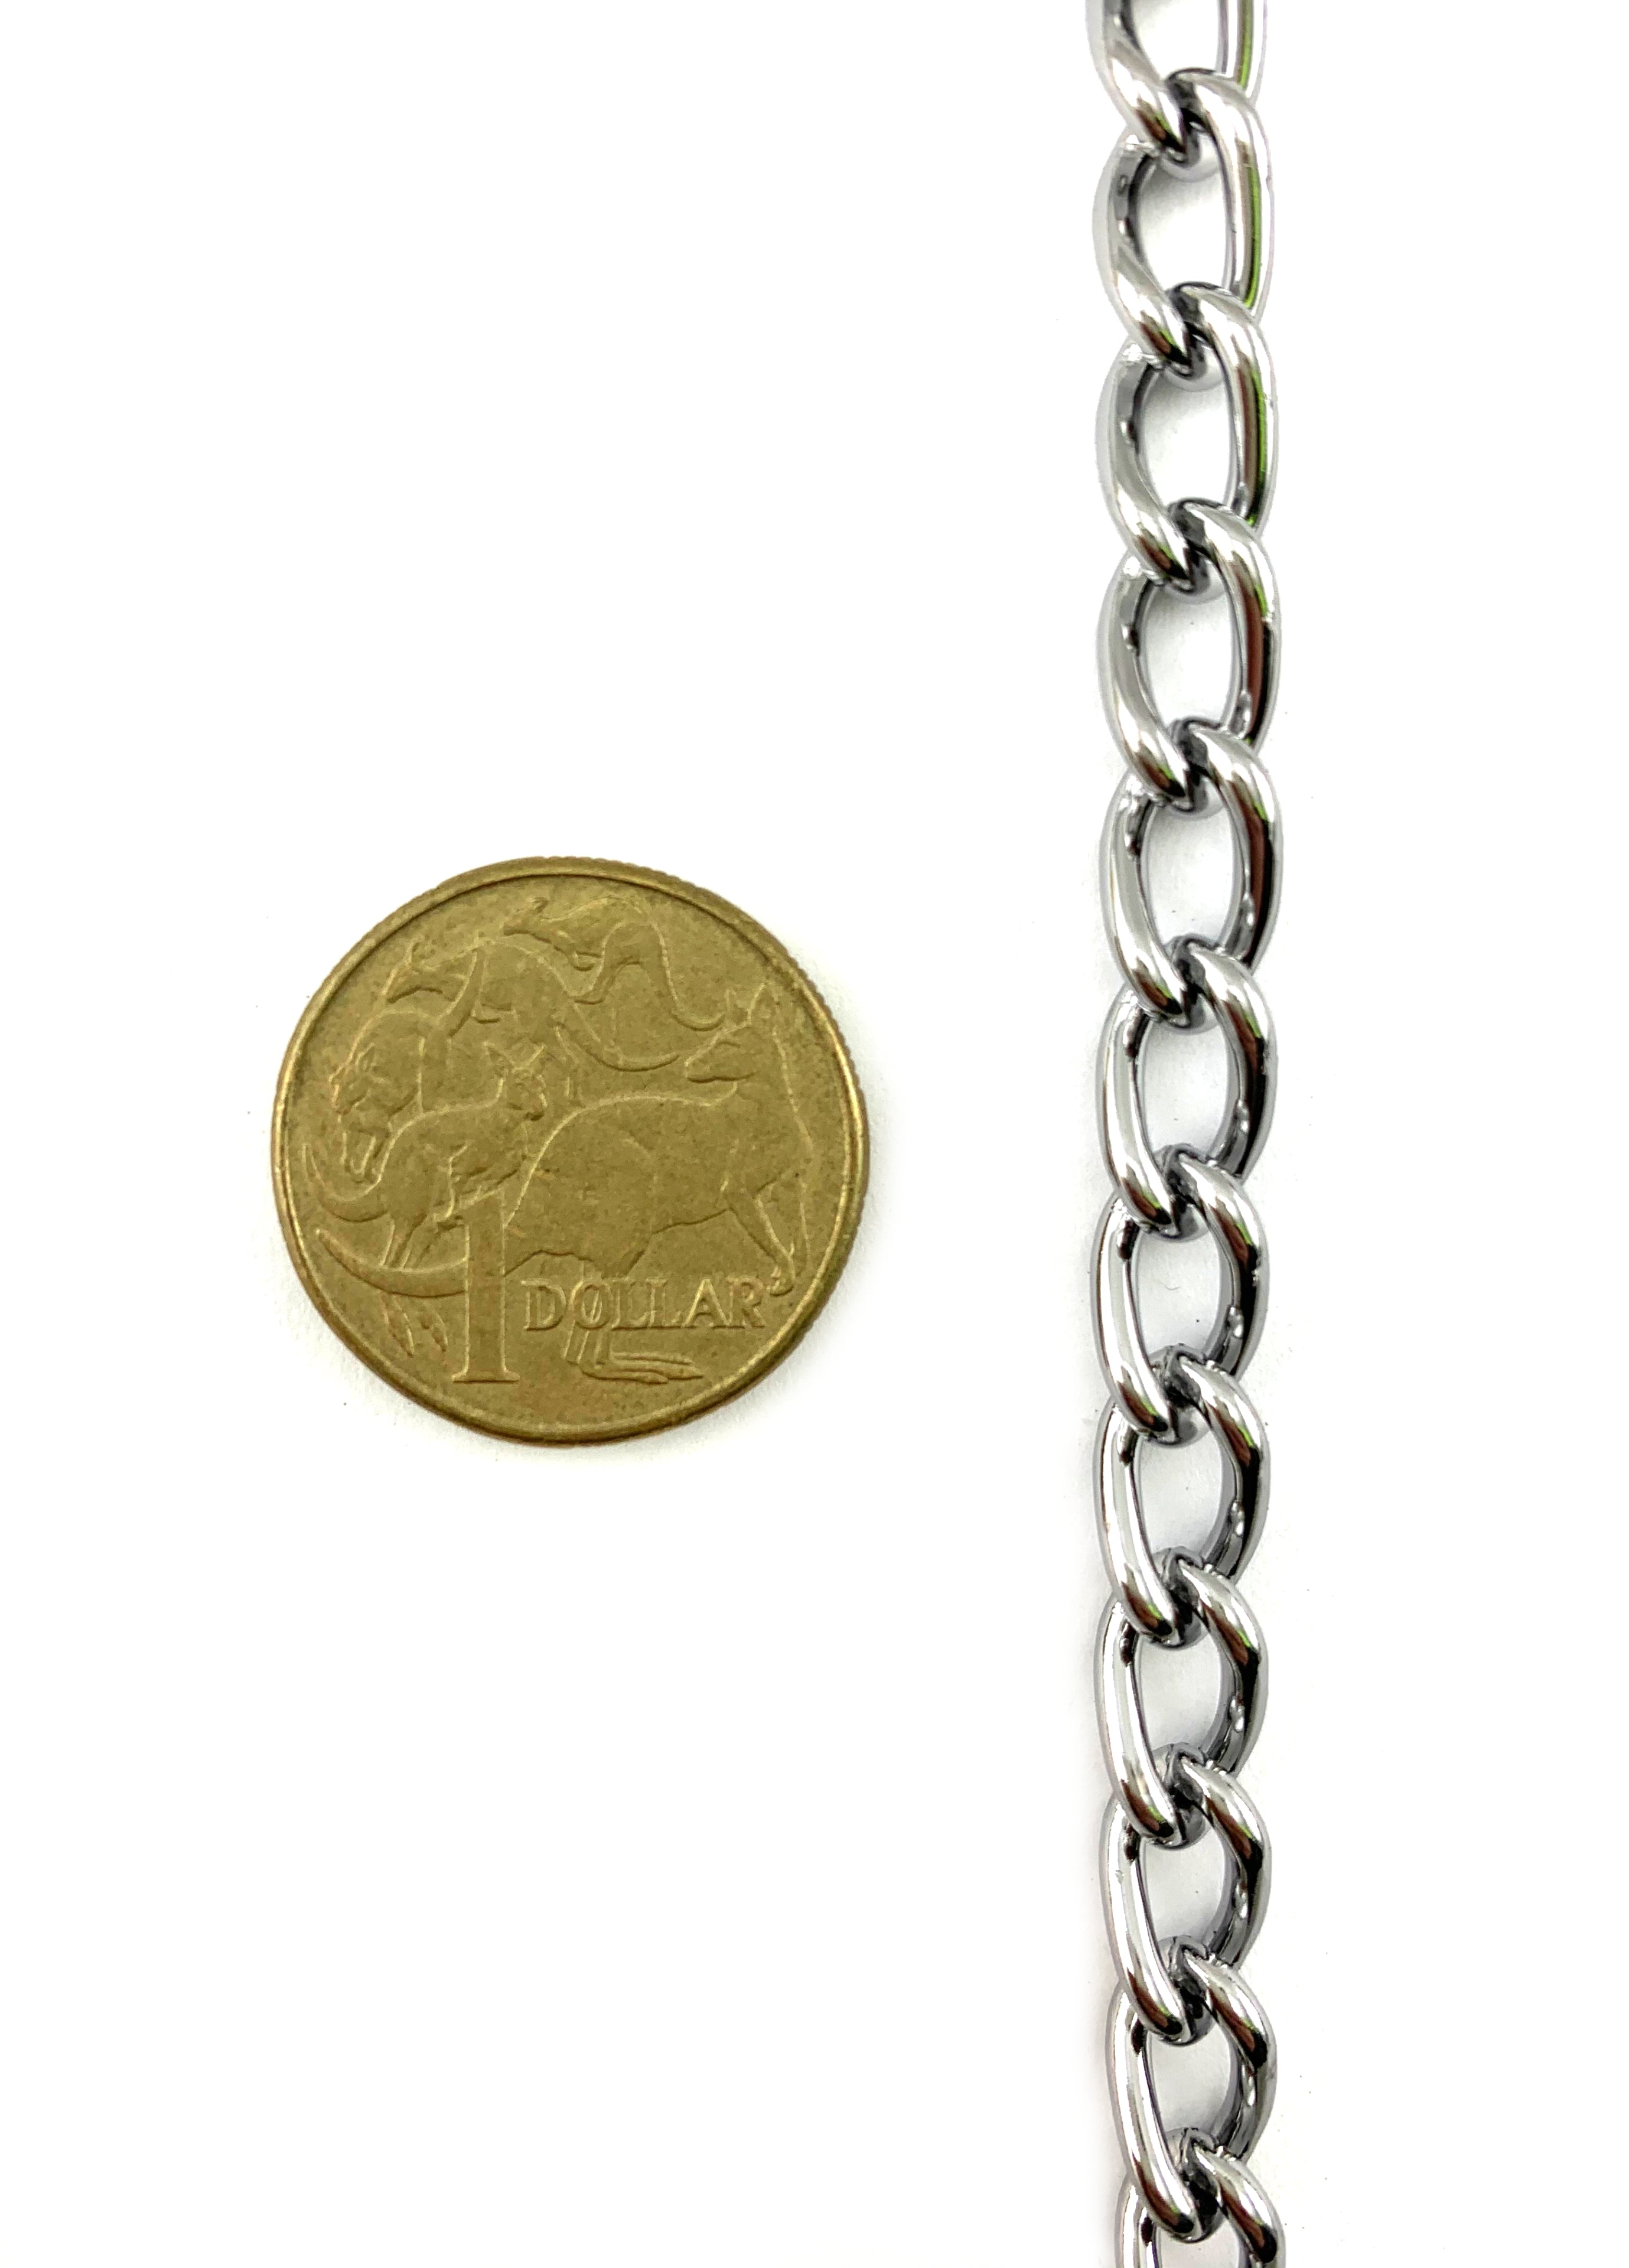 2mm Chrome Curb Chain on a 30 metre reel. Decorative Chain Australia wide delivery